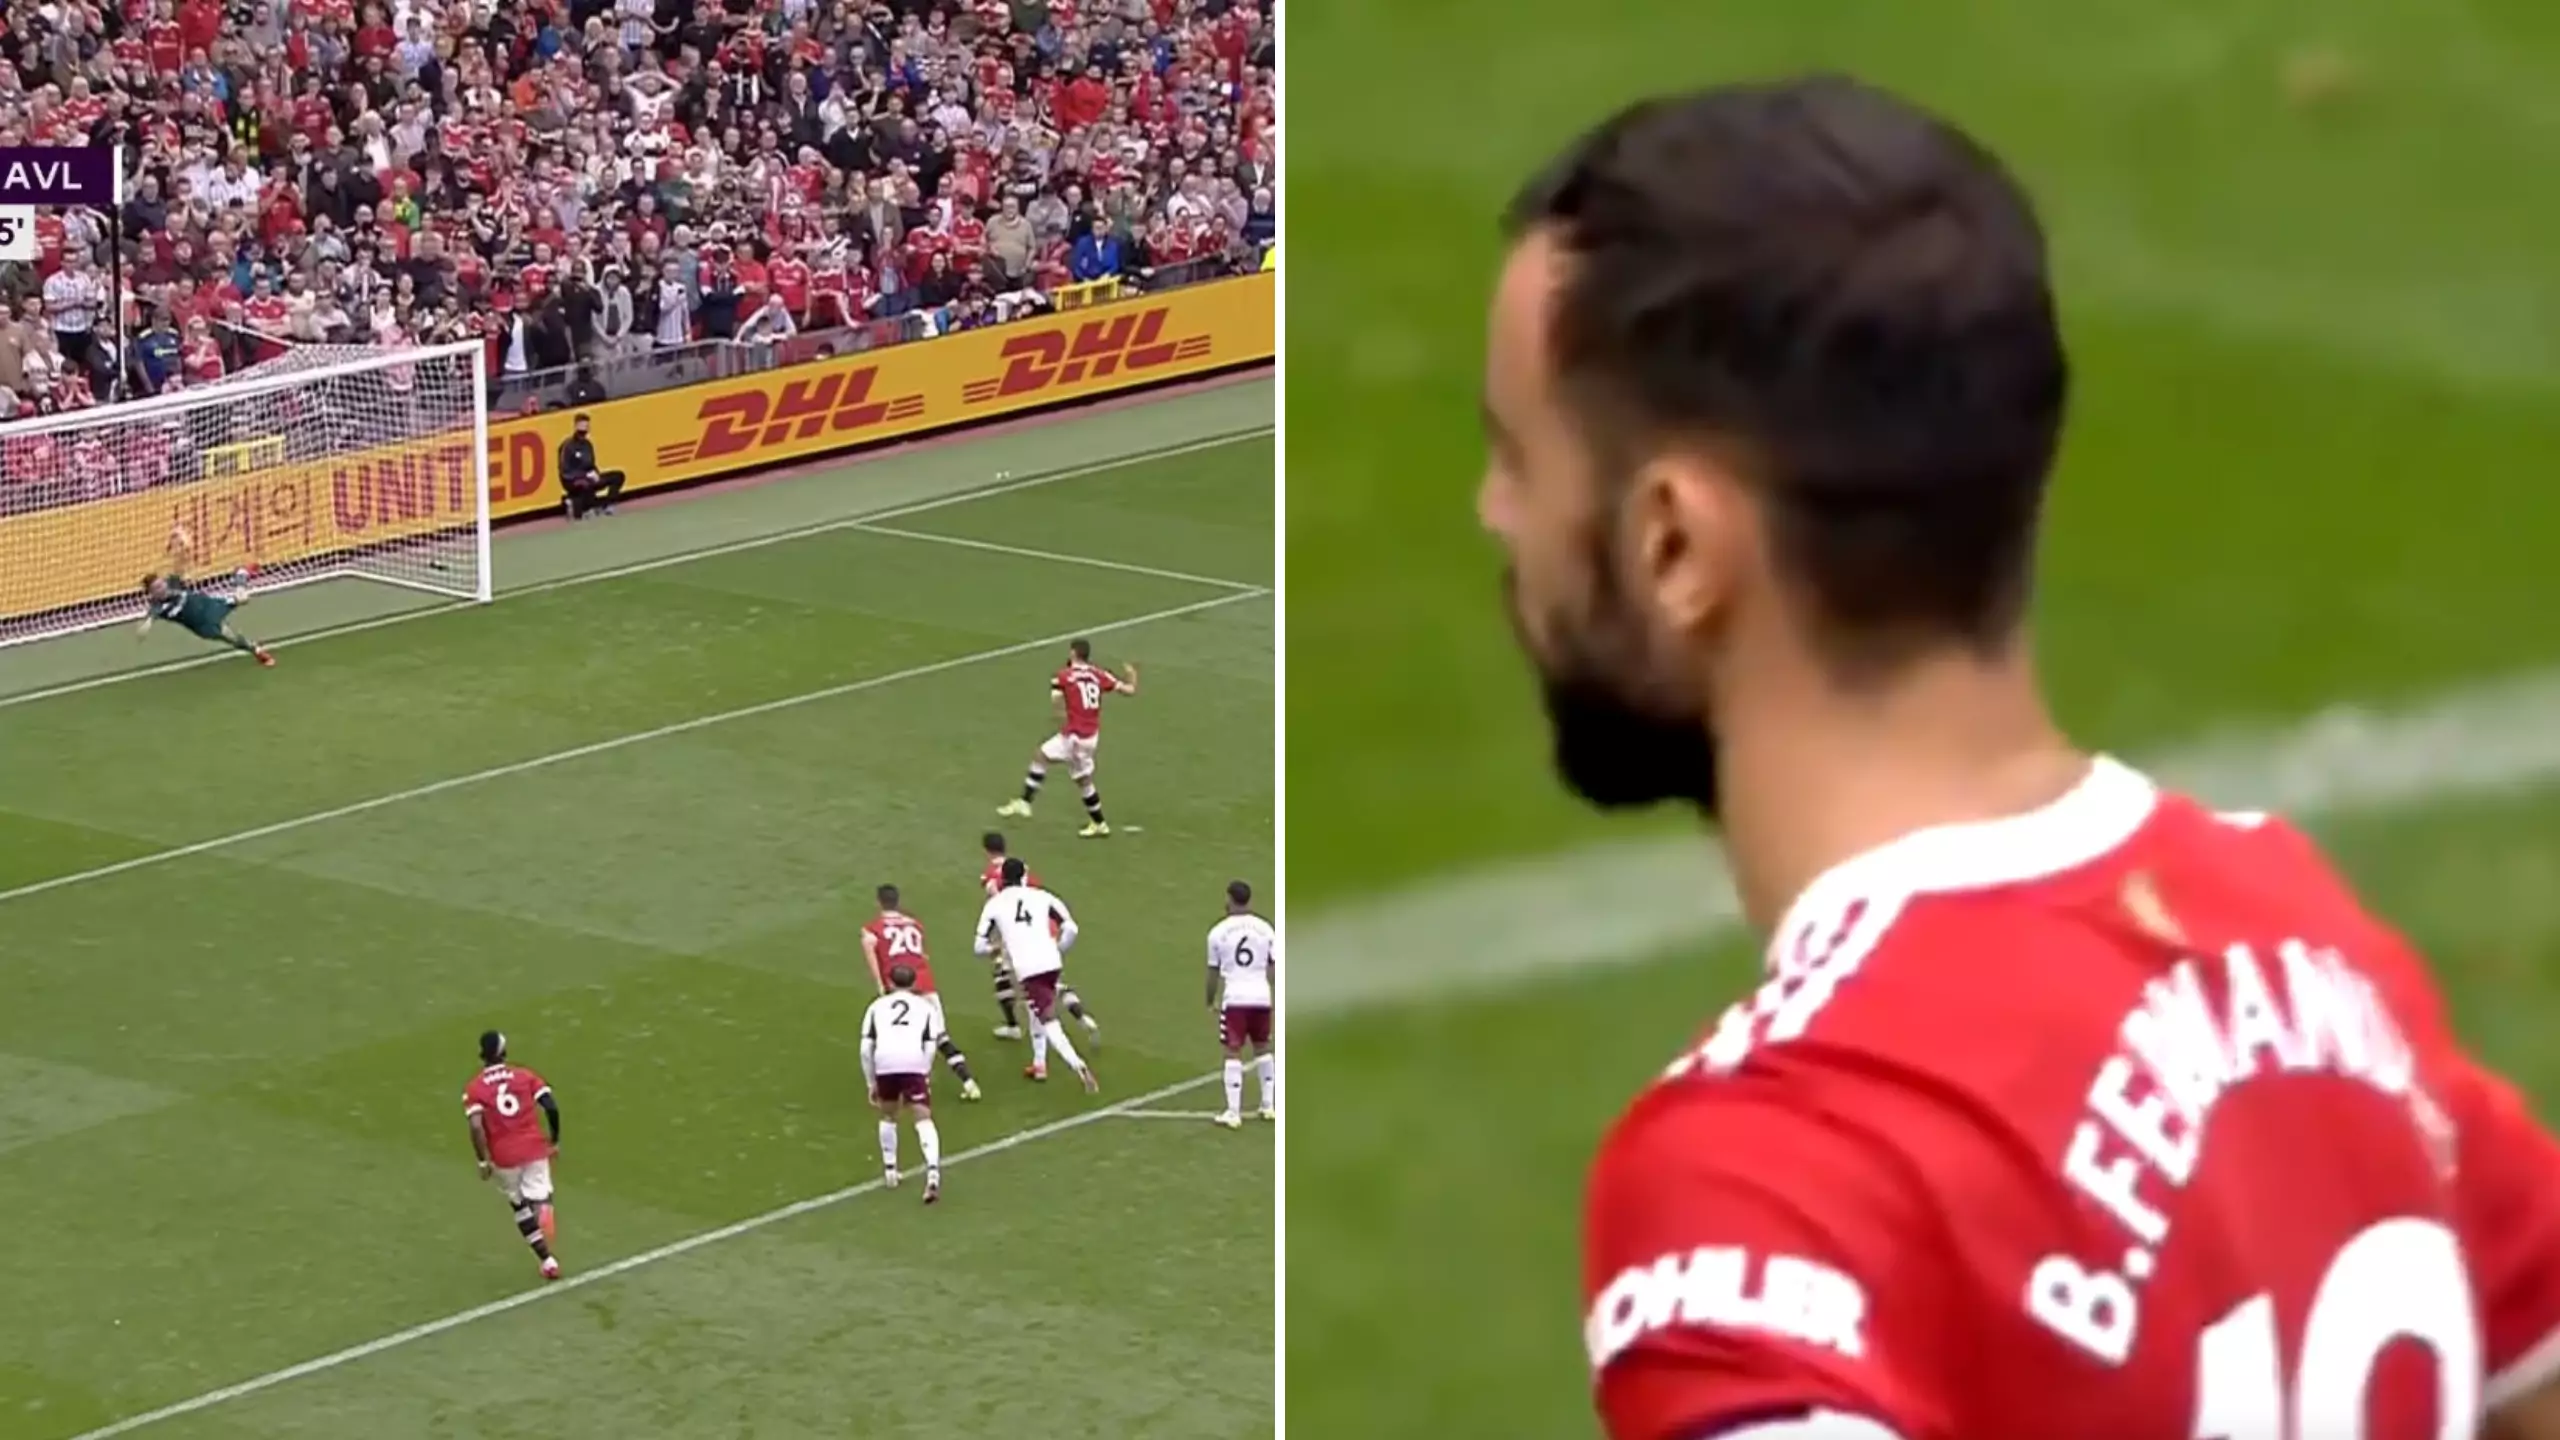 Bruno Fernandes Skies 92nd Minute Penalty As Manchester United Lose 1-0 To Aston Villa